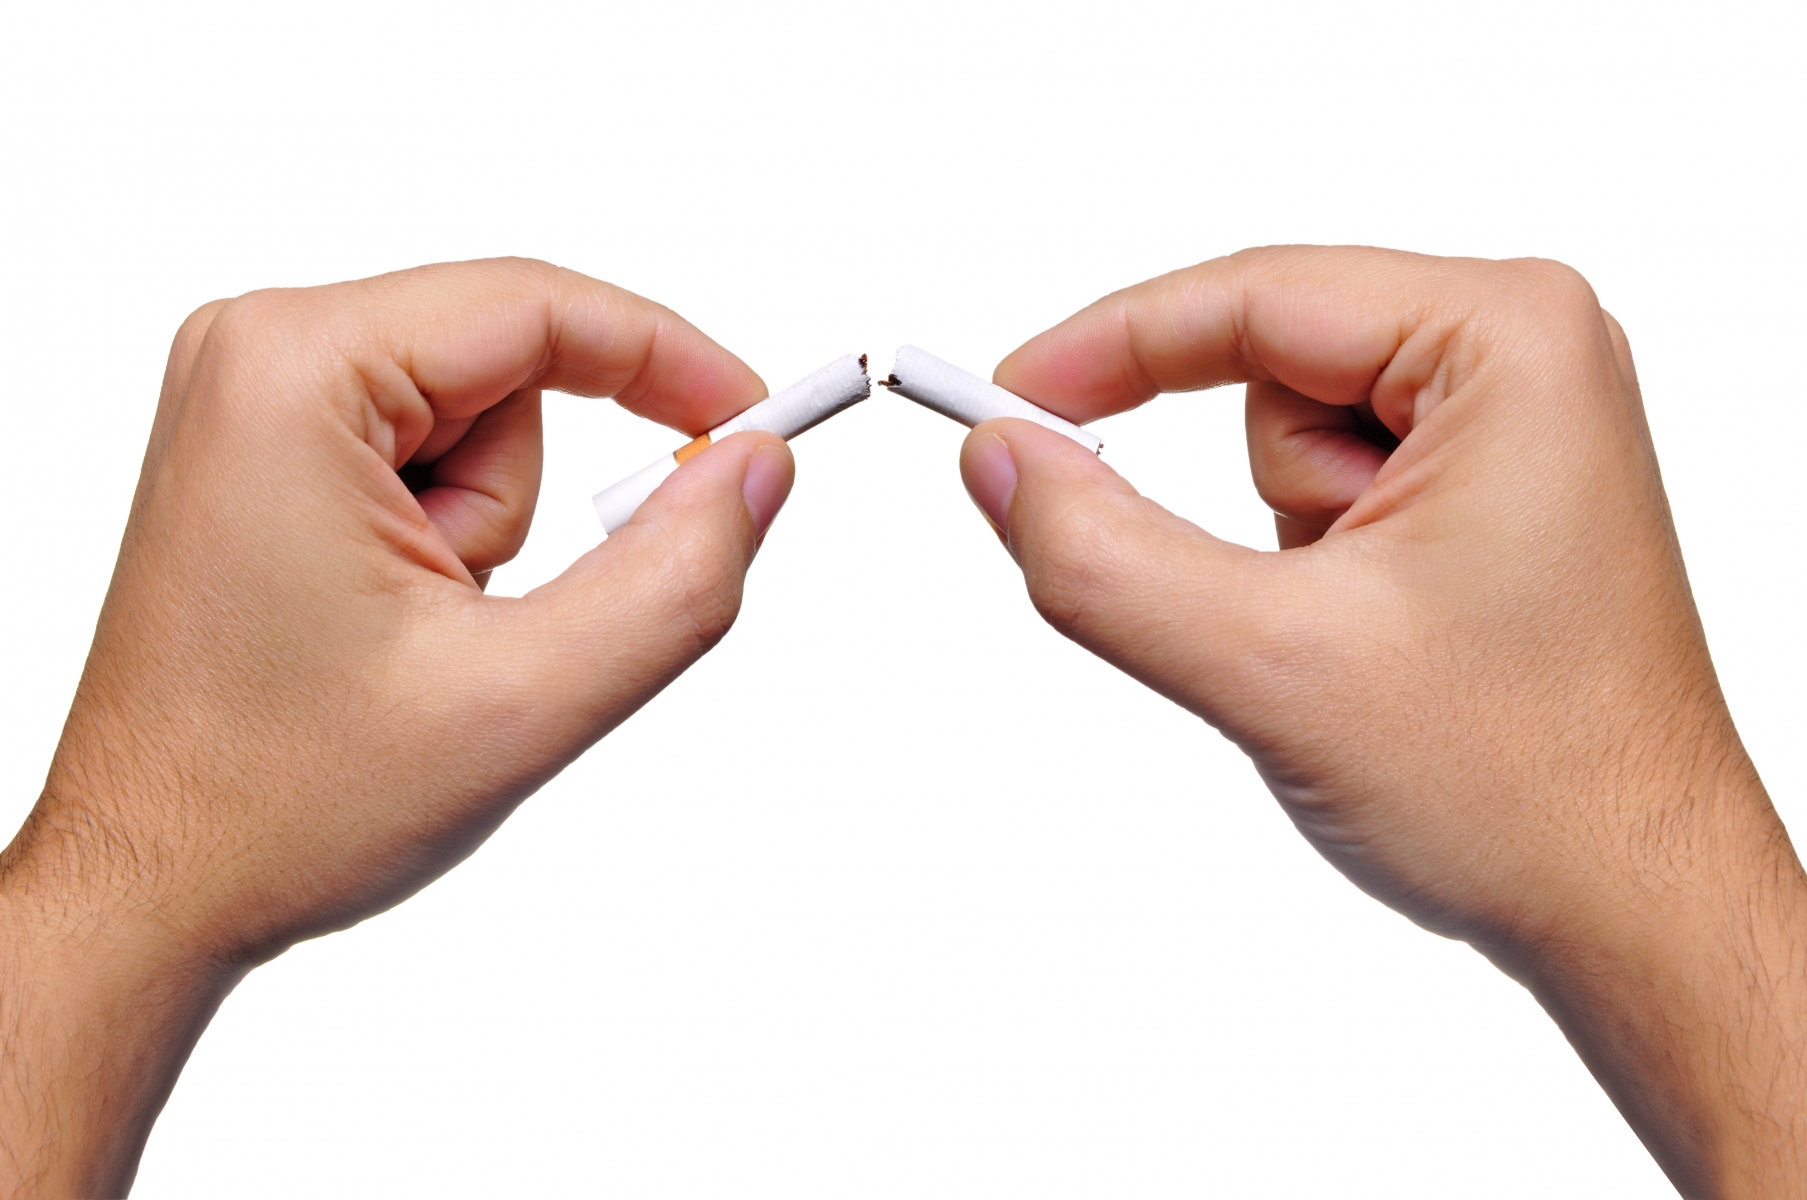 Tips And Tricks To Help You Control Your Tobacco Cravings